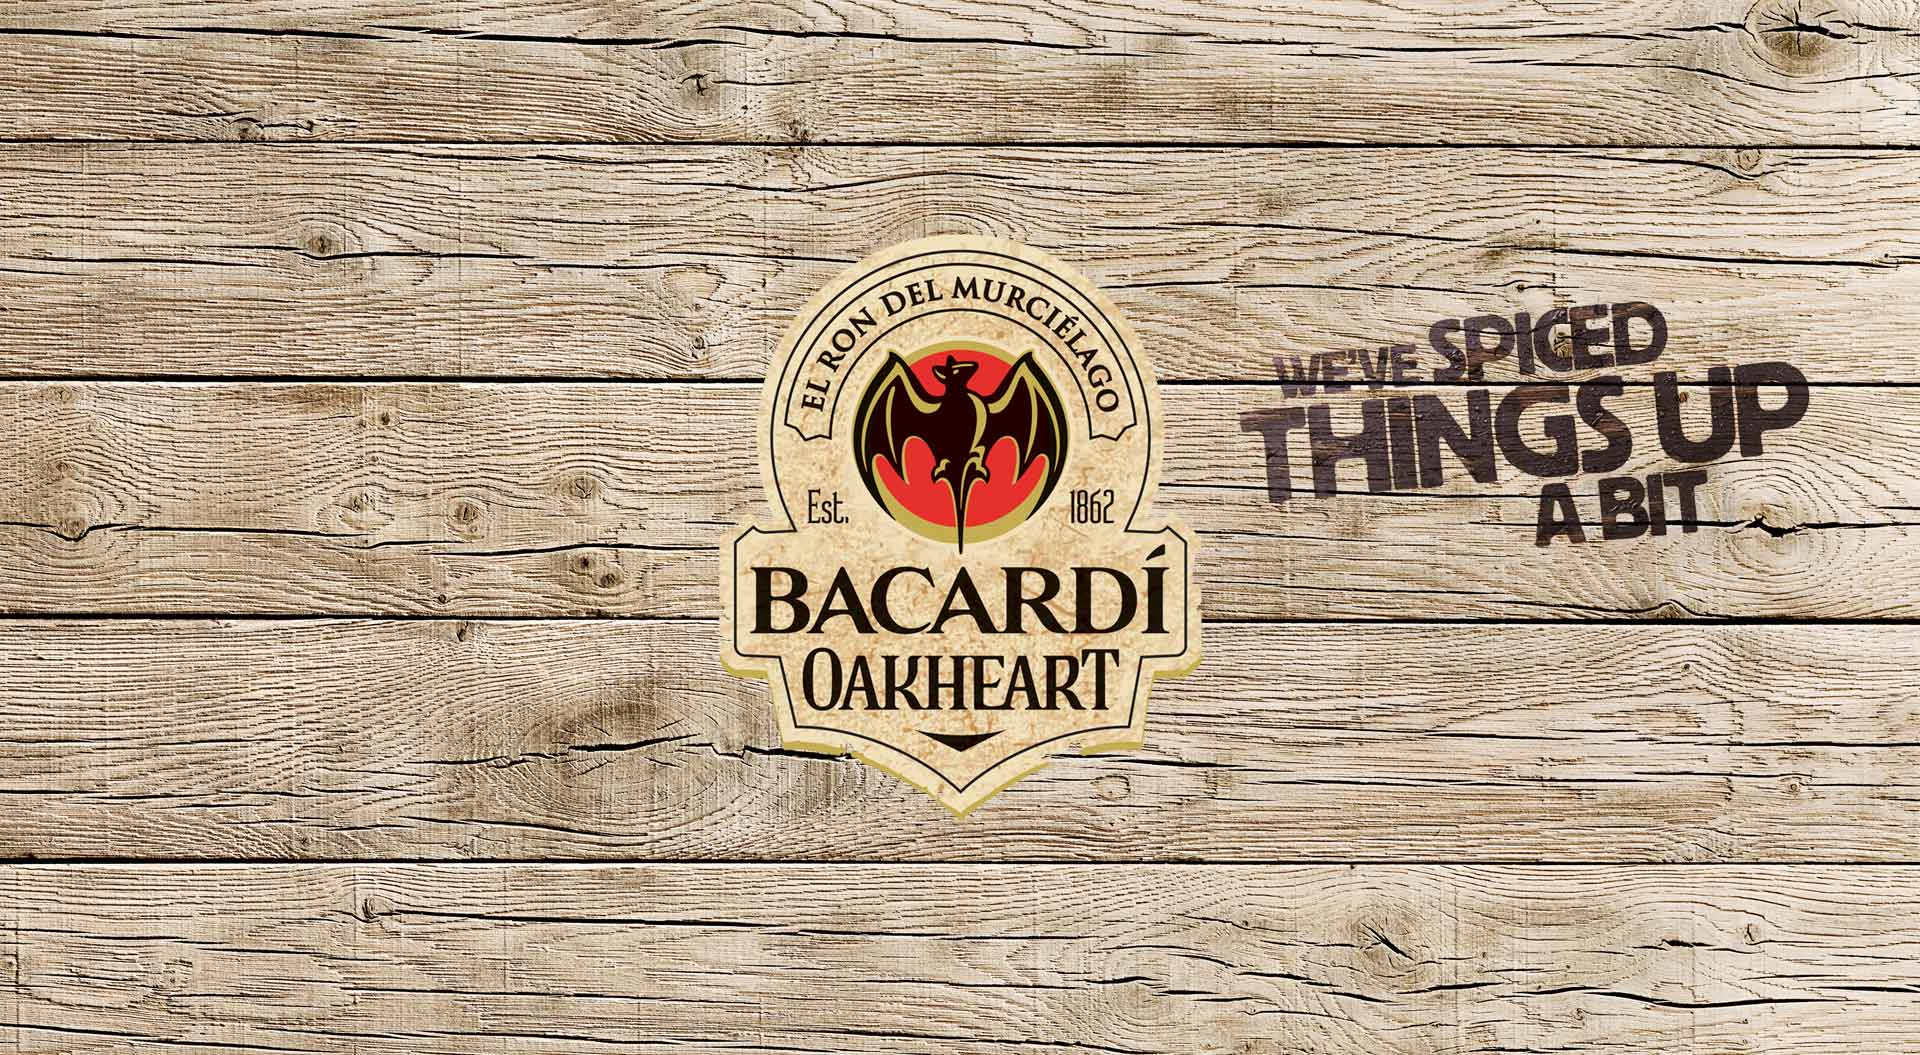 Spirits industry promotion campaigns travel retail, strategy marketing, retail design, airports, duty-free alcohol marketing, innovative concepts ideas Bacardi Global Travel Retail, brand Oakheart experience